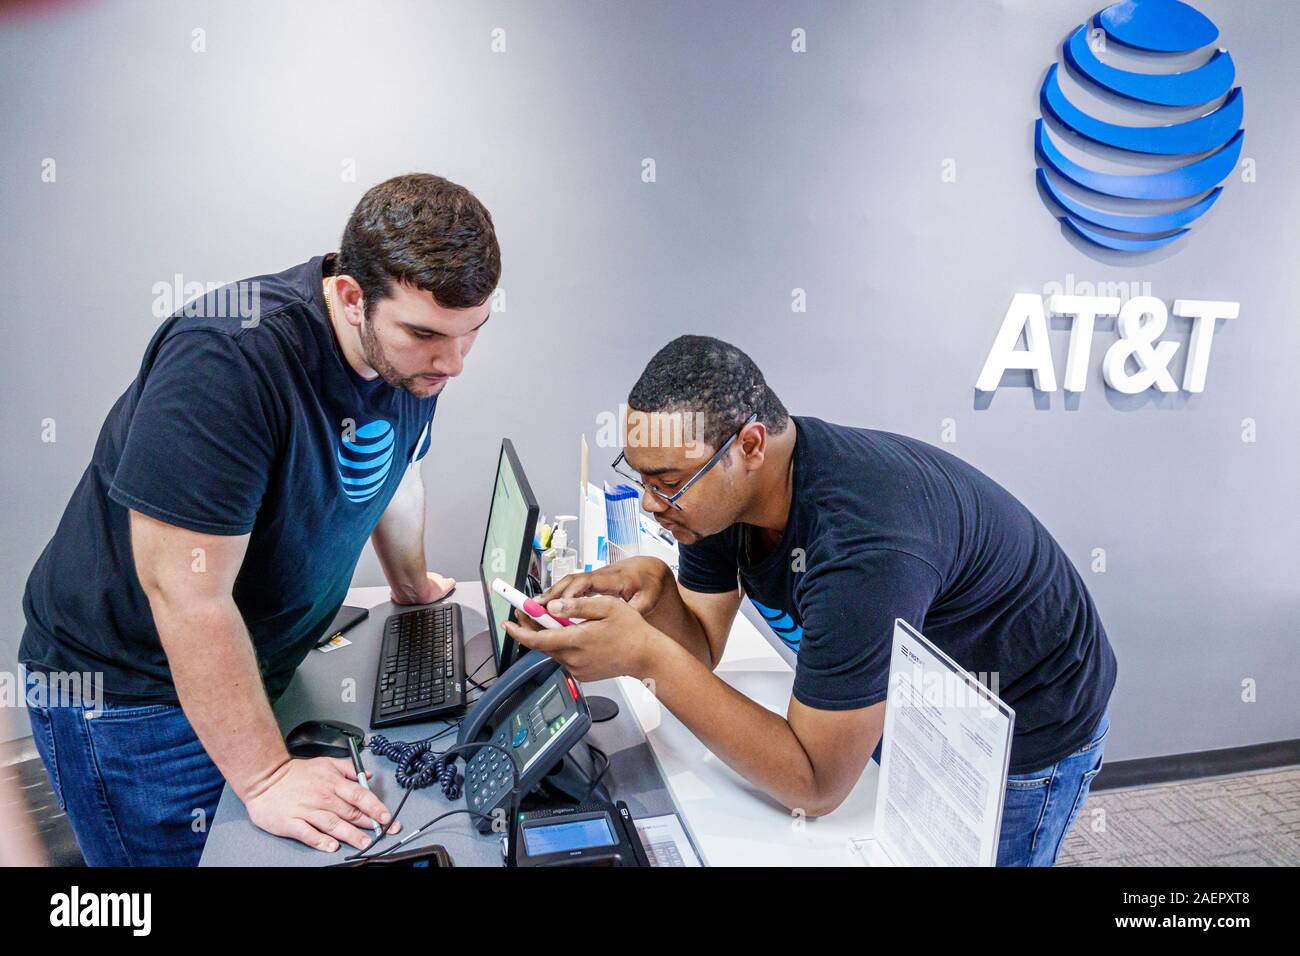 Miami Florida,Surfside,AT&T,store,telecommunications,technology,technician,employee employees worker workers working job jobs staff,Black Blacks Afric Stock Photo